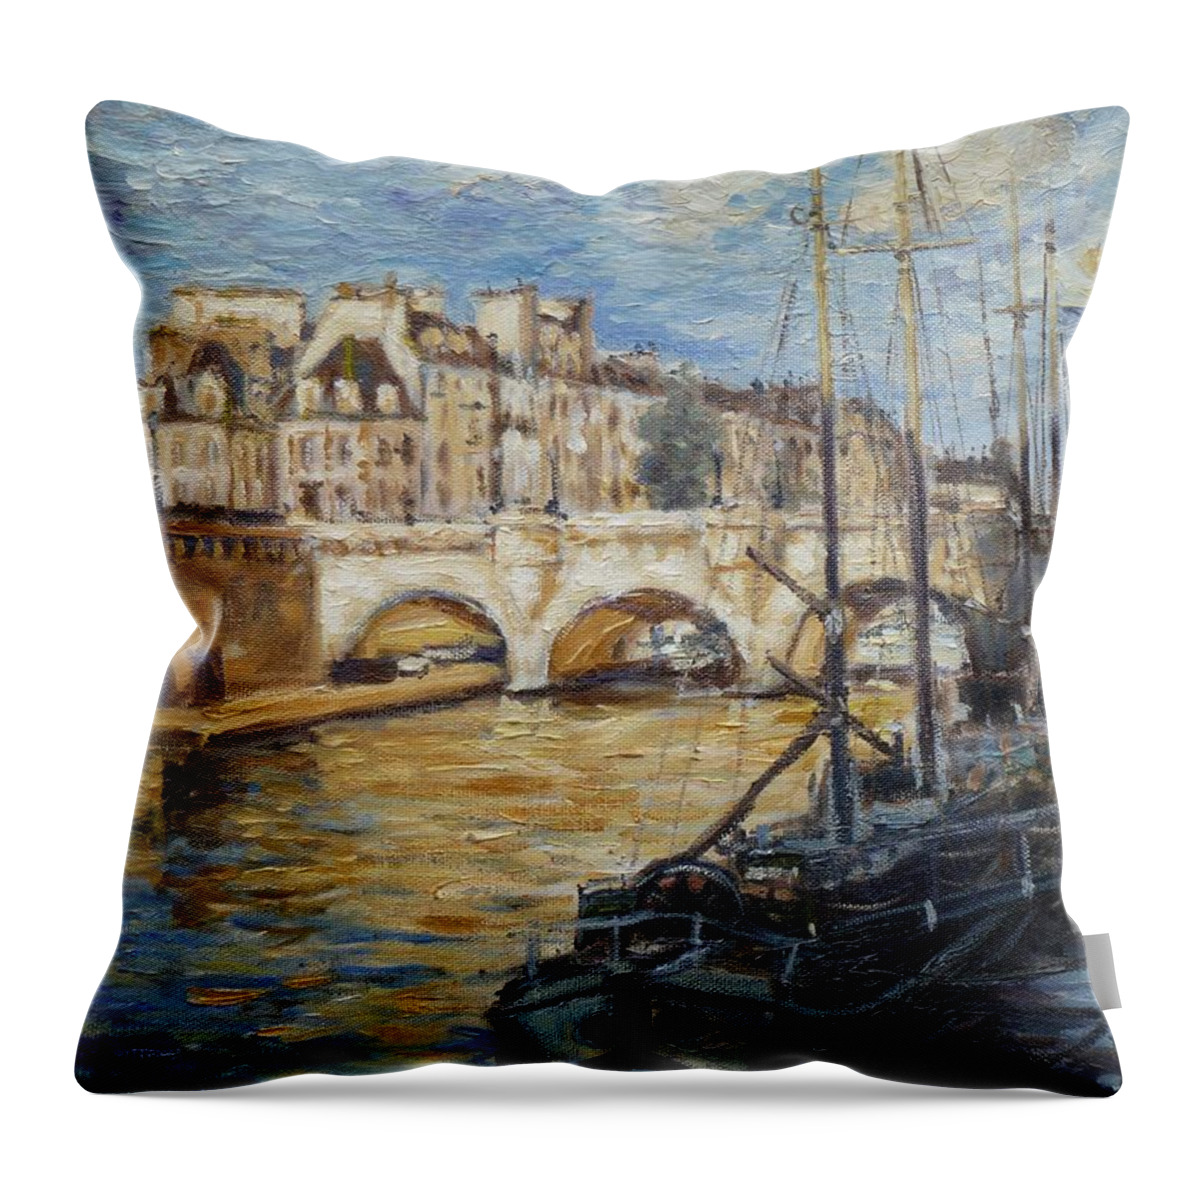 Punt Neuf Throw Pillow featuring the painting Pont Neuf Paris by Irek Szelag